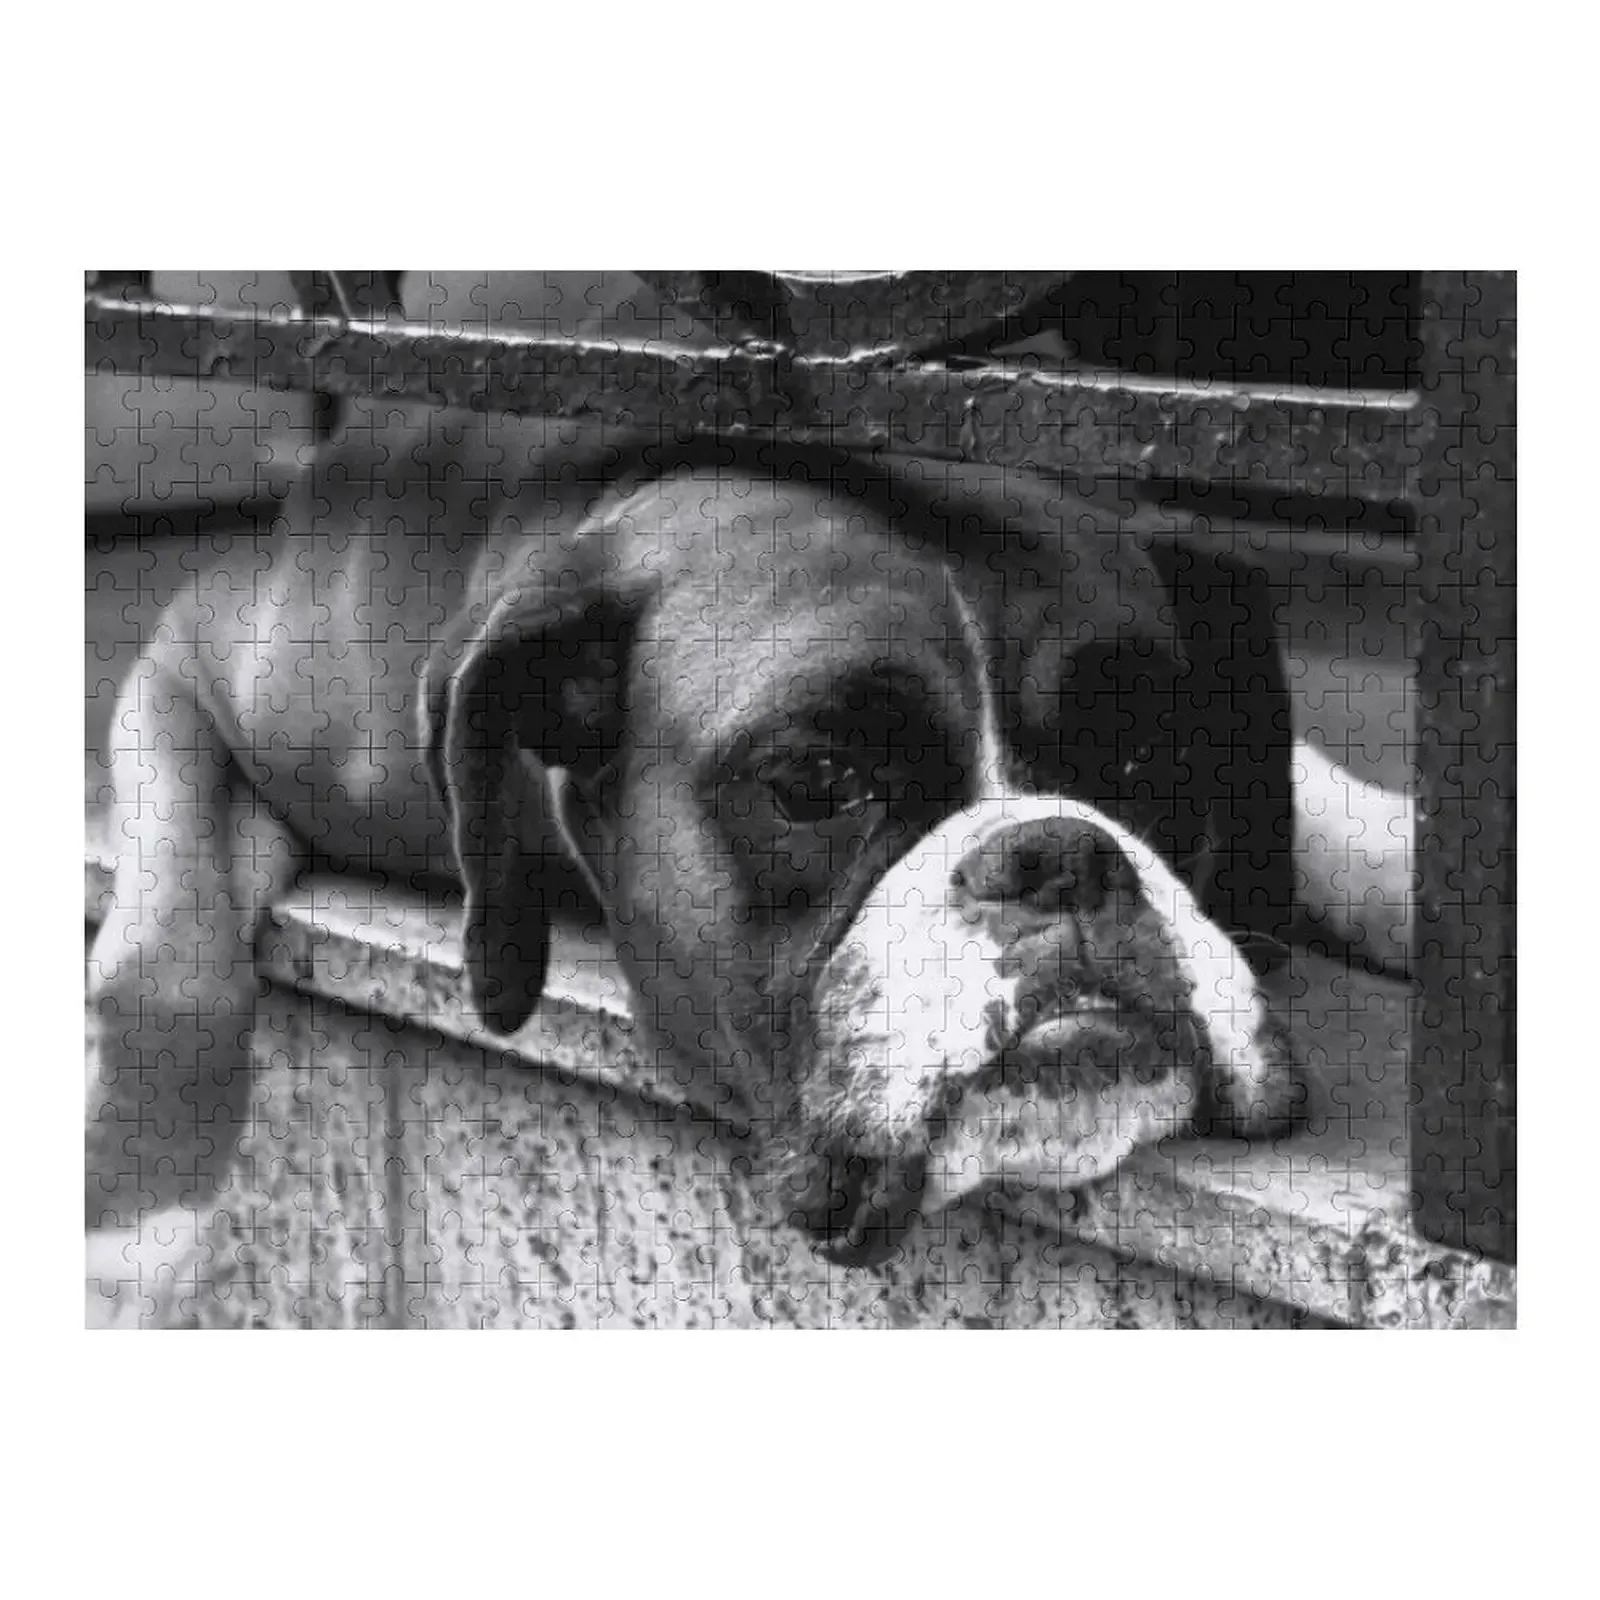 Boxer Dog On Windowsill Jigsaw Puzzle Woodens For Adults Custom Name Wood Wood Photo Personalized With Photo Puzzle window charles rennie mackintosh jigsaw puzzle personalized customized toys for kids jigsaw pieces adults puzzle